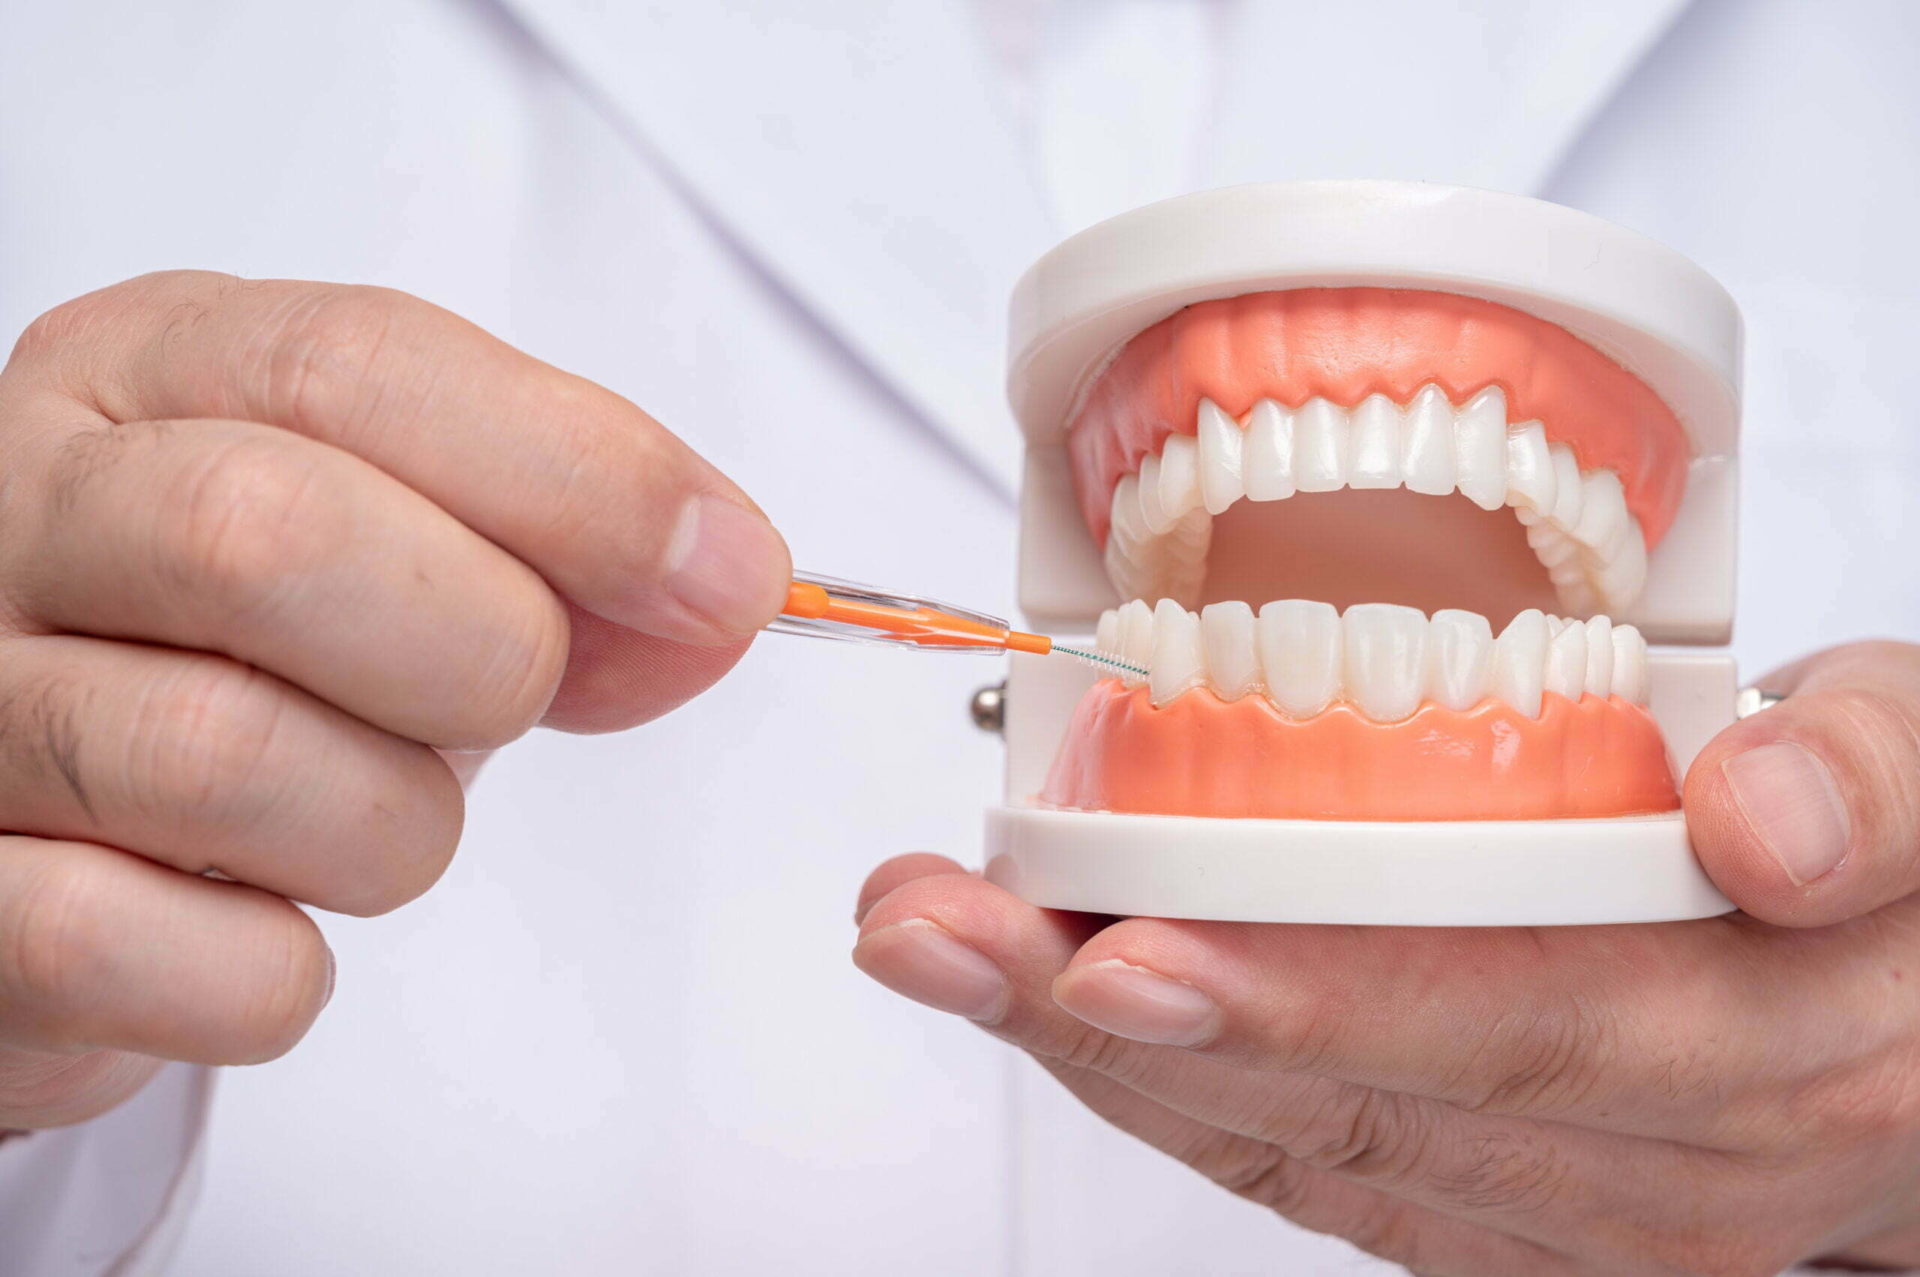 A dentist holding a tooth model and an interdental brush.